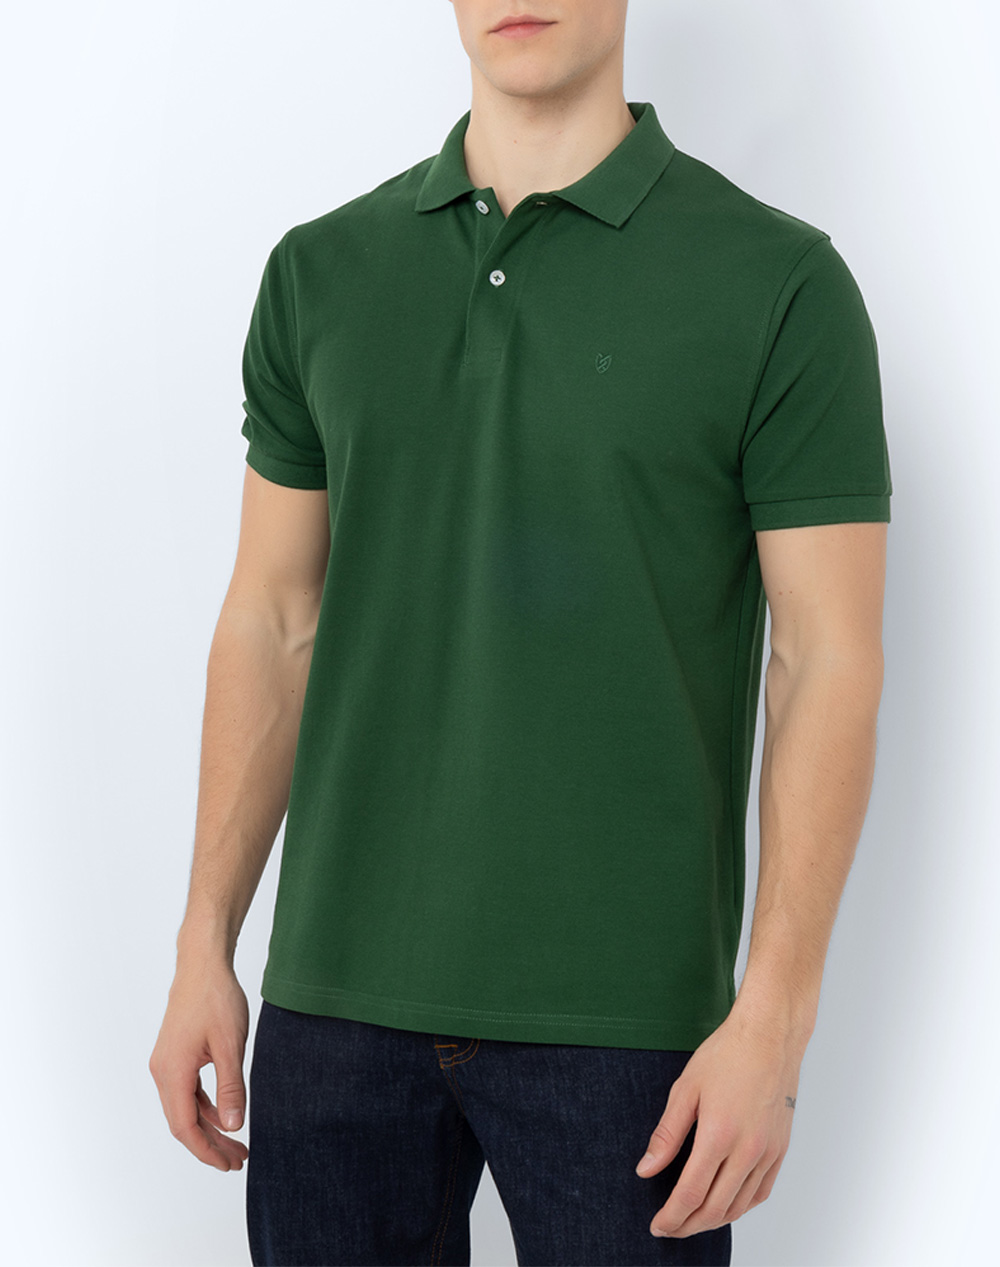 THE BOSTONIANS ΜΠΛΟΥΖΑ POLO PIQUE REGULAR FIT 3PS0001-BOSTON Green 3820ABOST3410092_XR30396